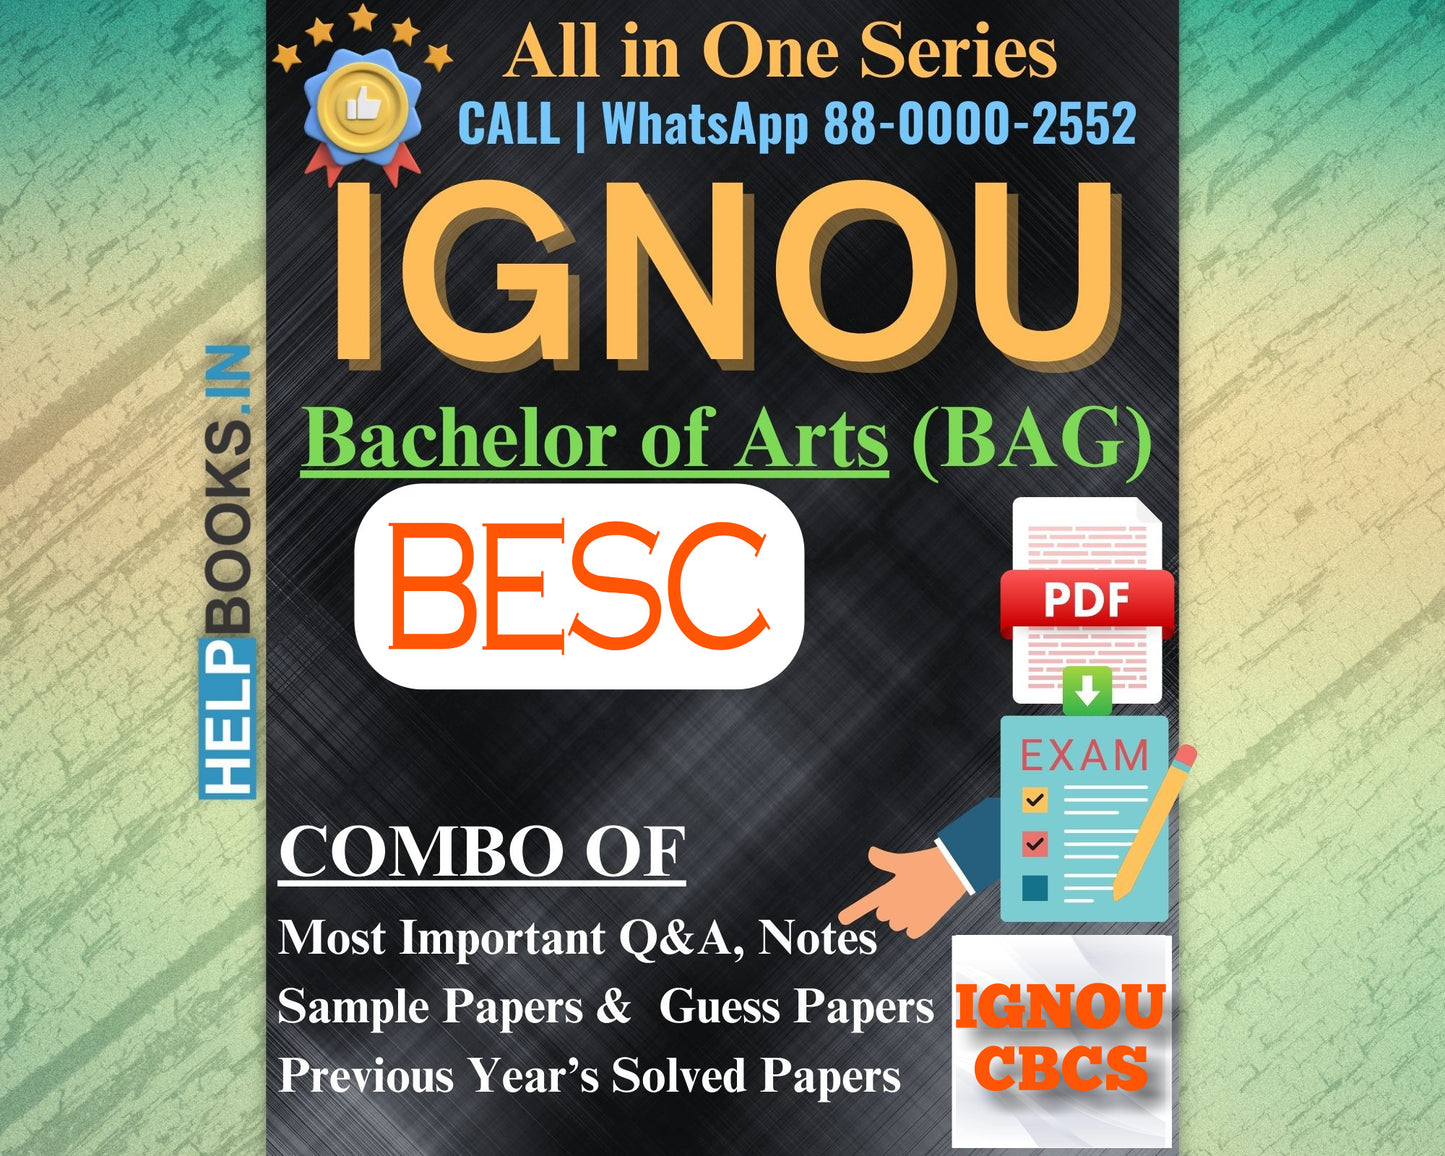 IGNOU BAG Online Study Package: Bachelor of Arts (BA) - Previous Years Solved Papers, Q&A, Exam Notes, Sample Papers, Guess Papers-BESC131, BESC132, BESC133, BESC134